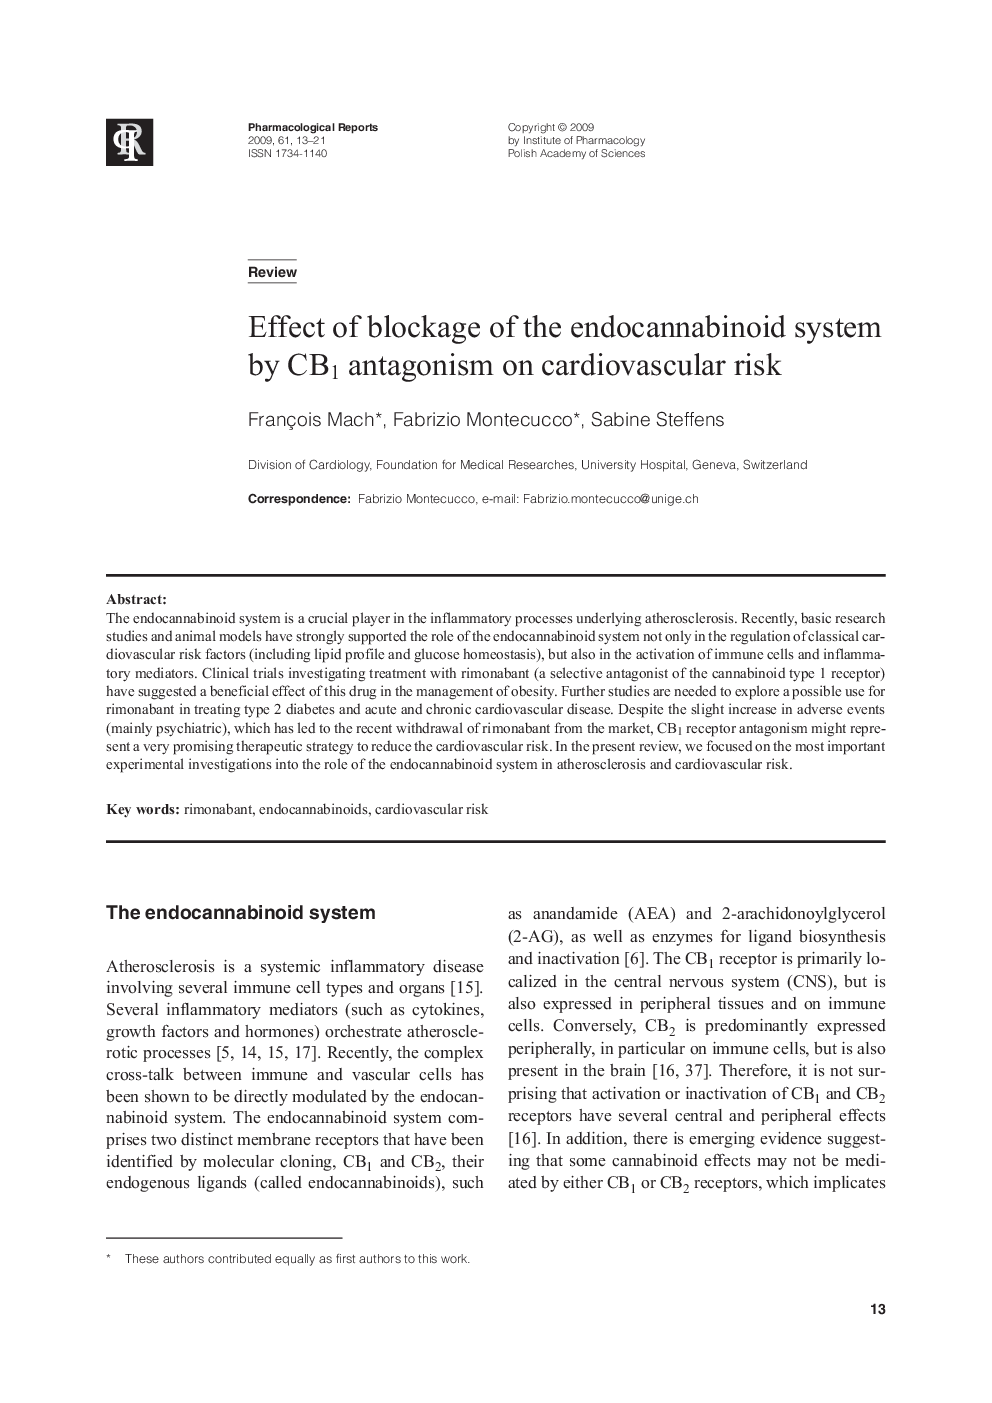 Effect of blockage of the endocannabinoid system by CB1 antagonism on cardiovascular risk